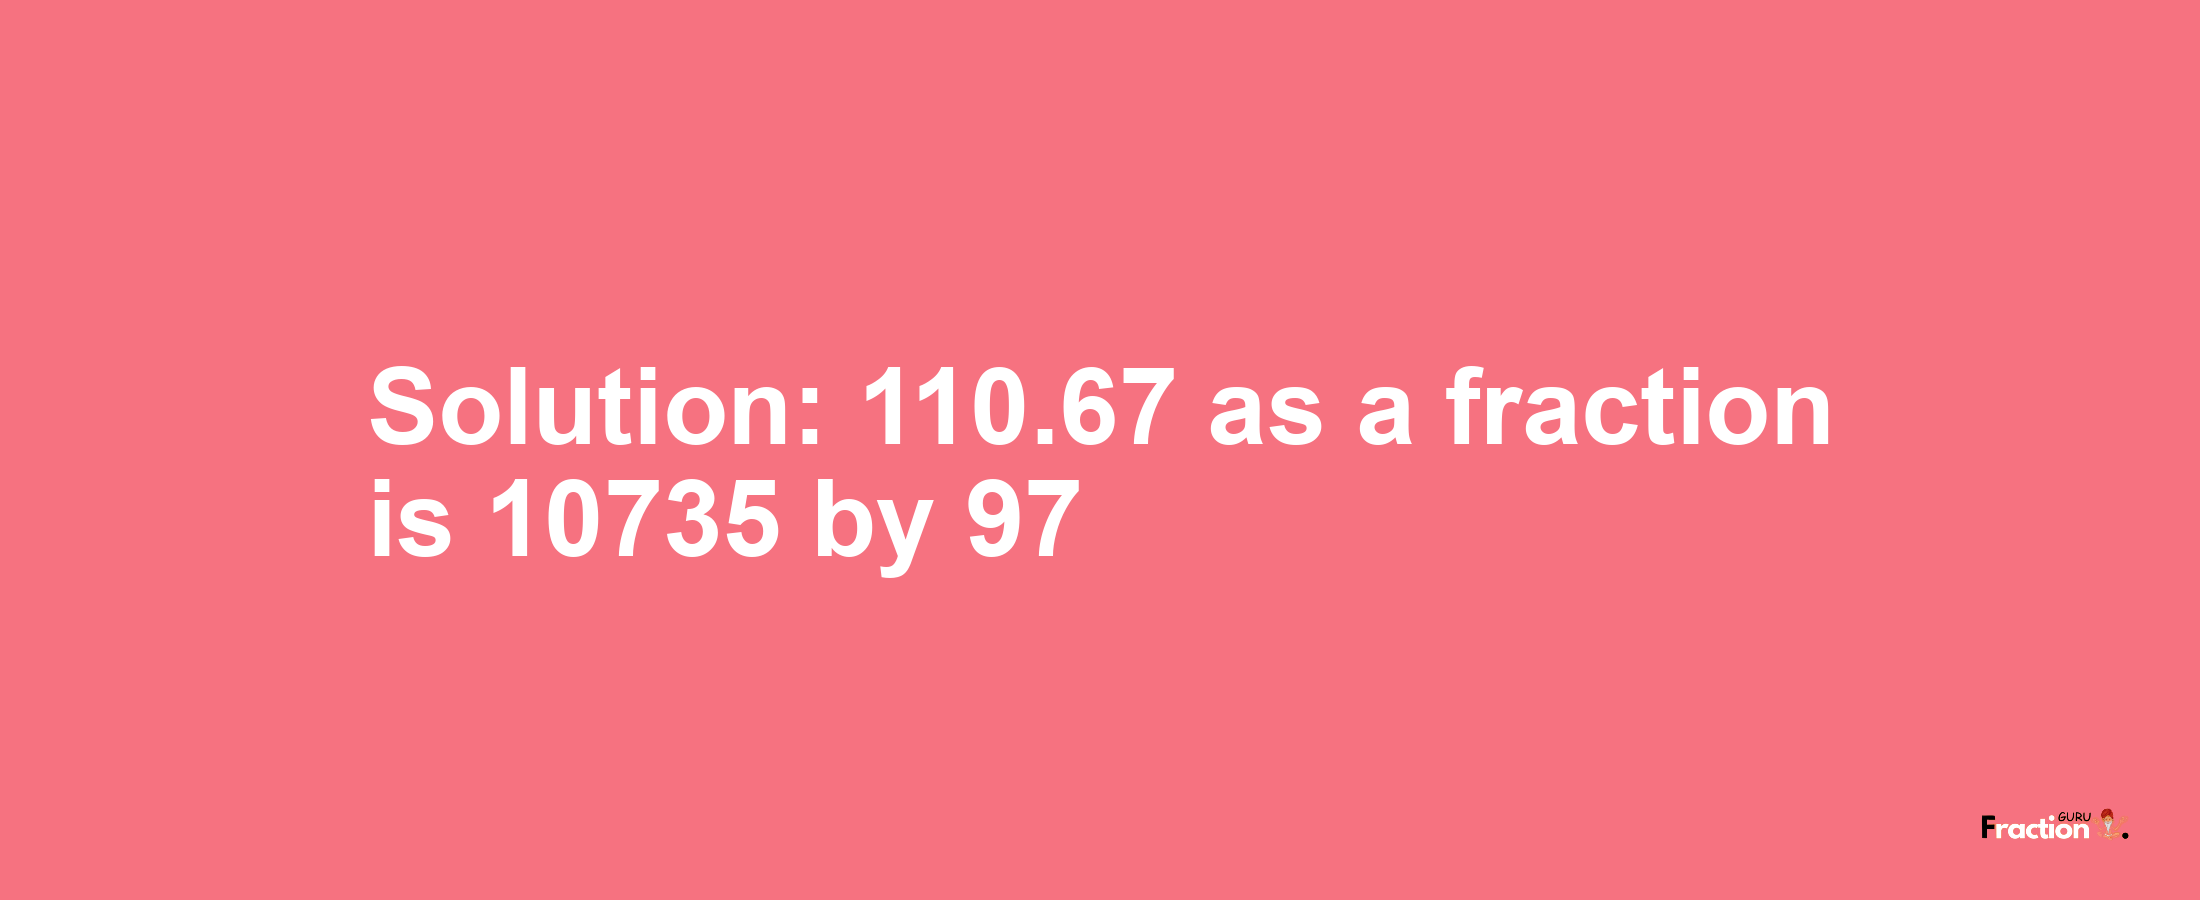 Solution:110.67 as a fraction is 10735/97